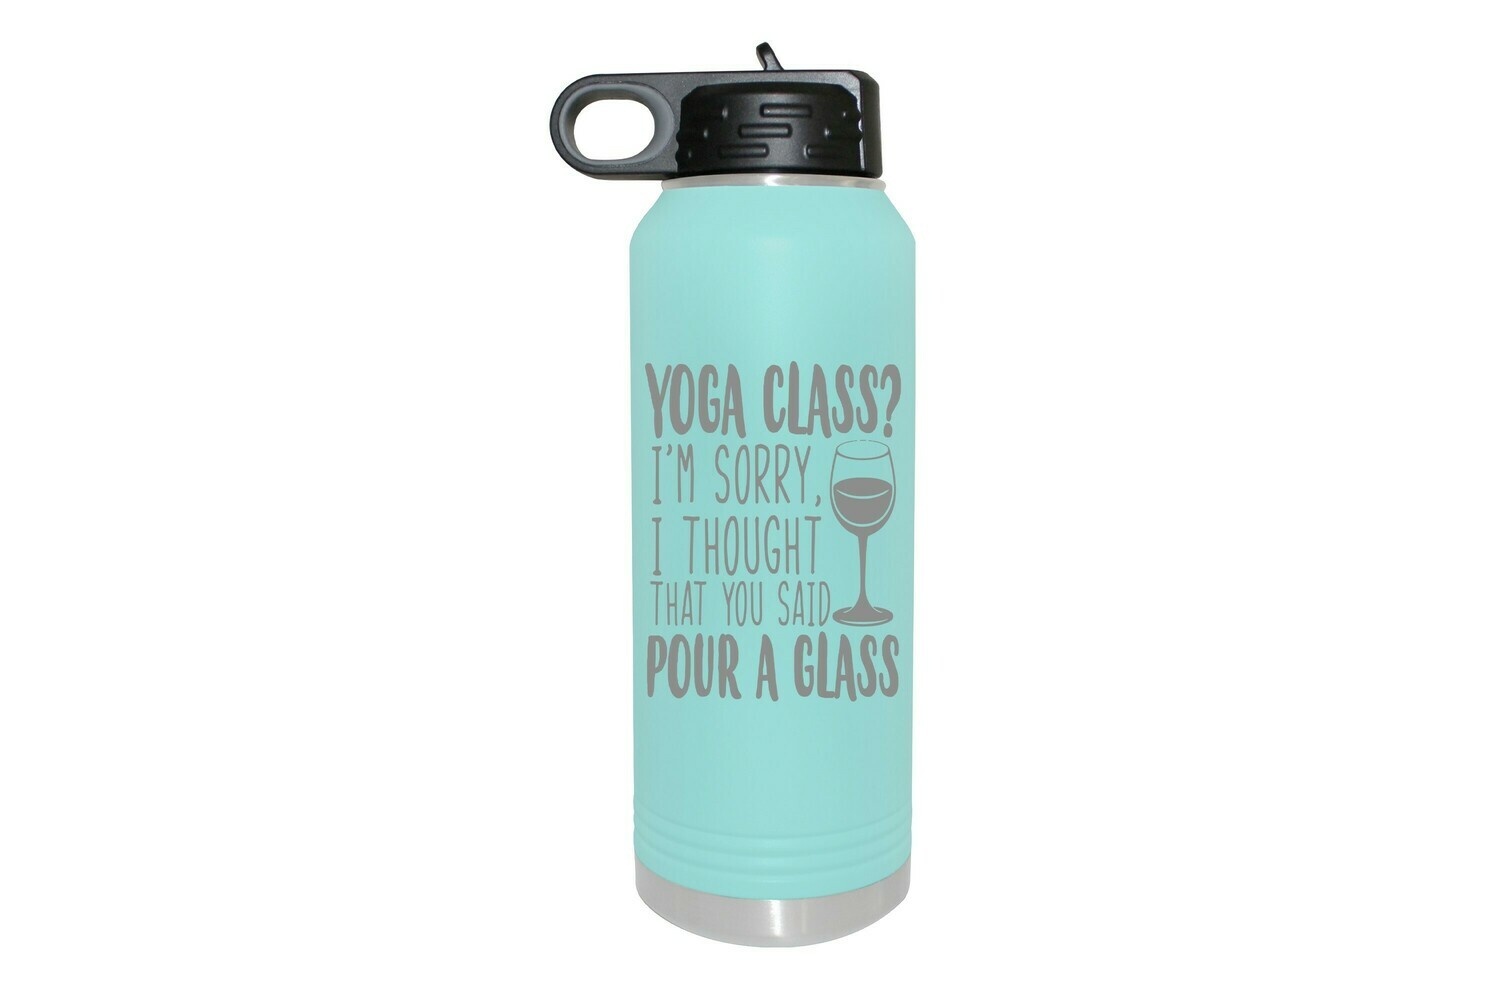 Yoga Class? I'm sorry I thought that you said Pour a Glass Water Bottle 32 oz